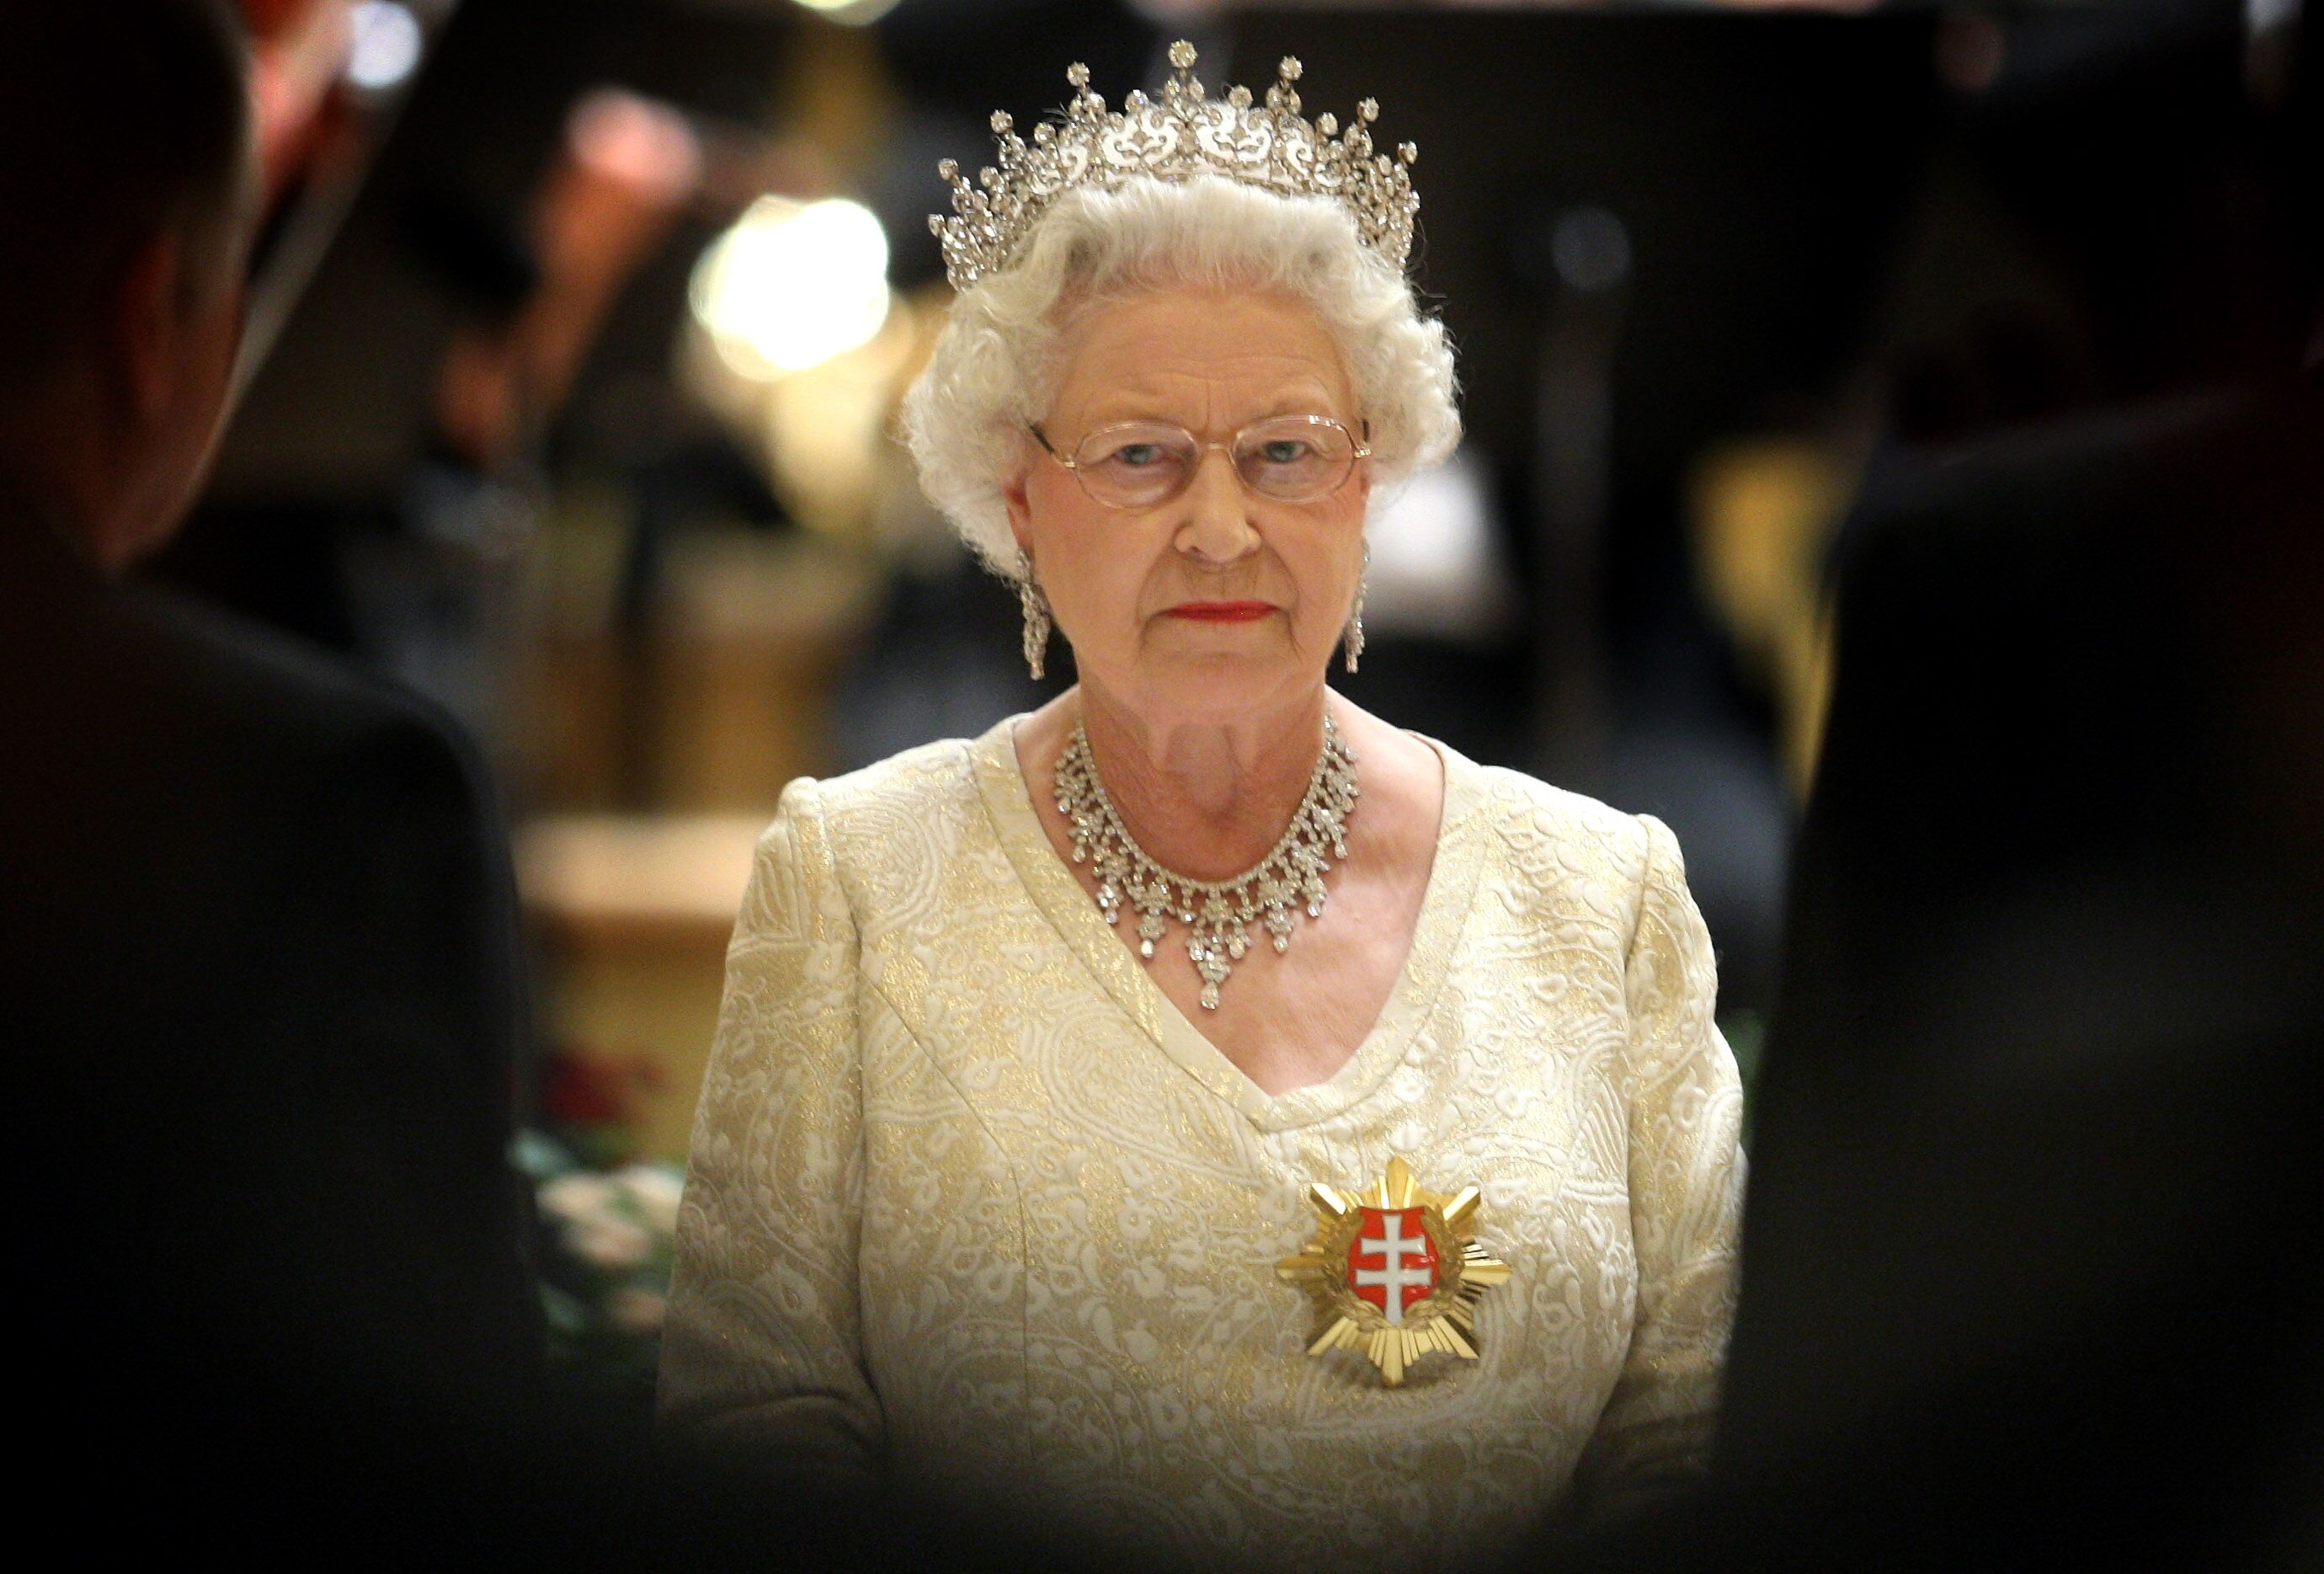 HRH Queen Elizabeth II attends a State Banquet at the Philharmonic Hall on the first day of a tour of Slovakia in Bratislava, Slovakia. | Photo: Getty Images